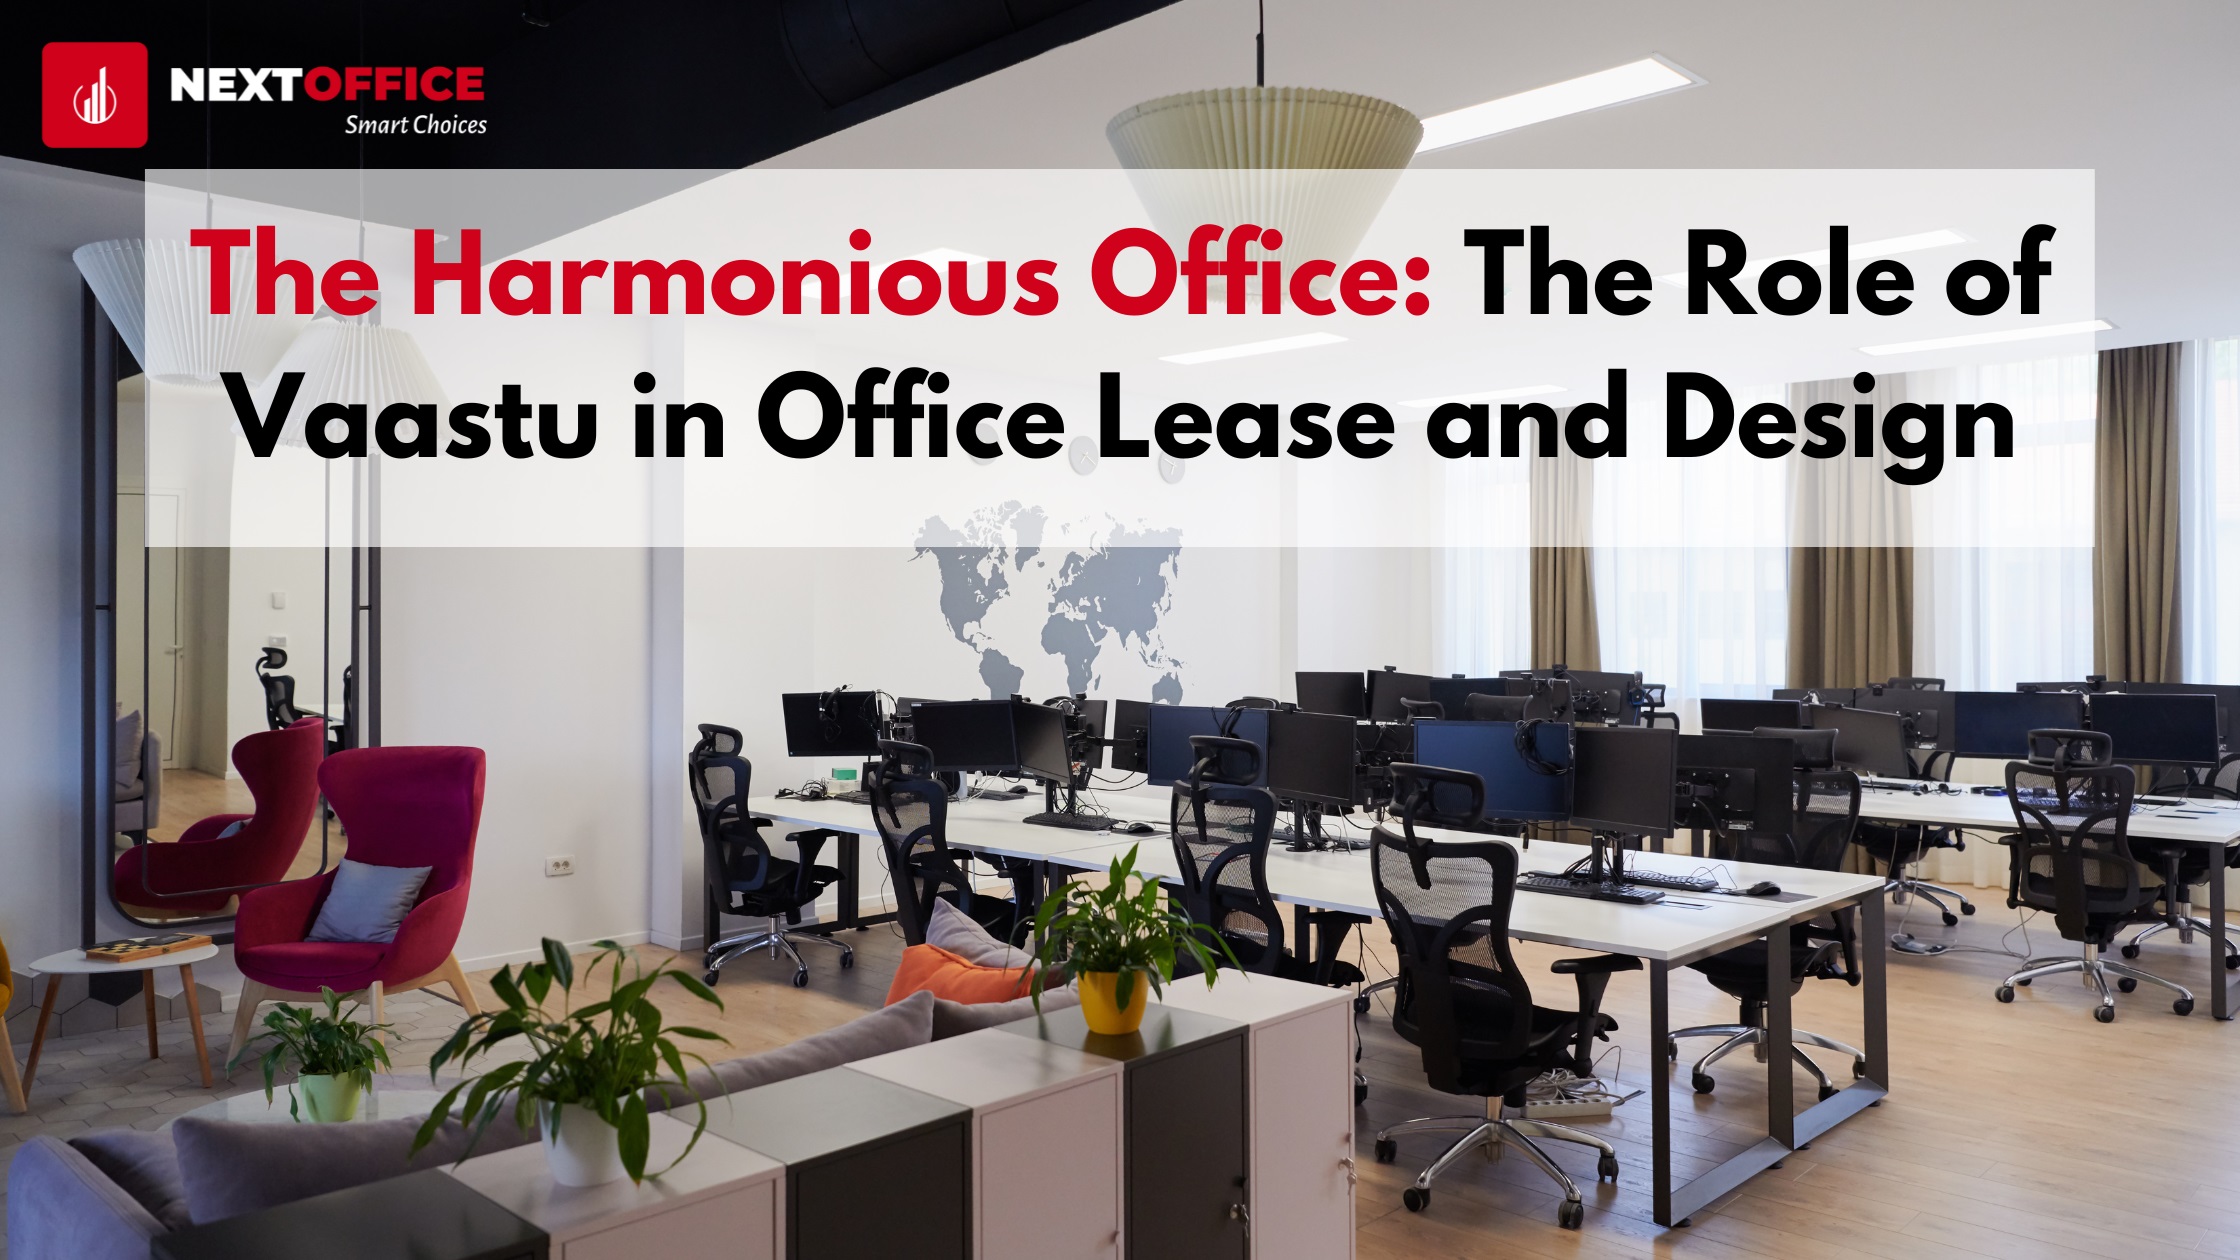 The Harmonious Office: The Role of Vaastu in Office Lease and Design